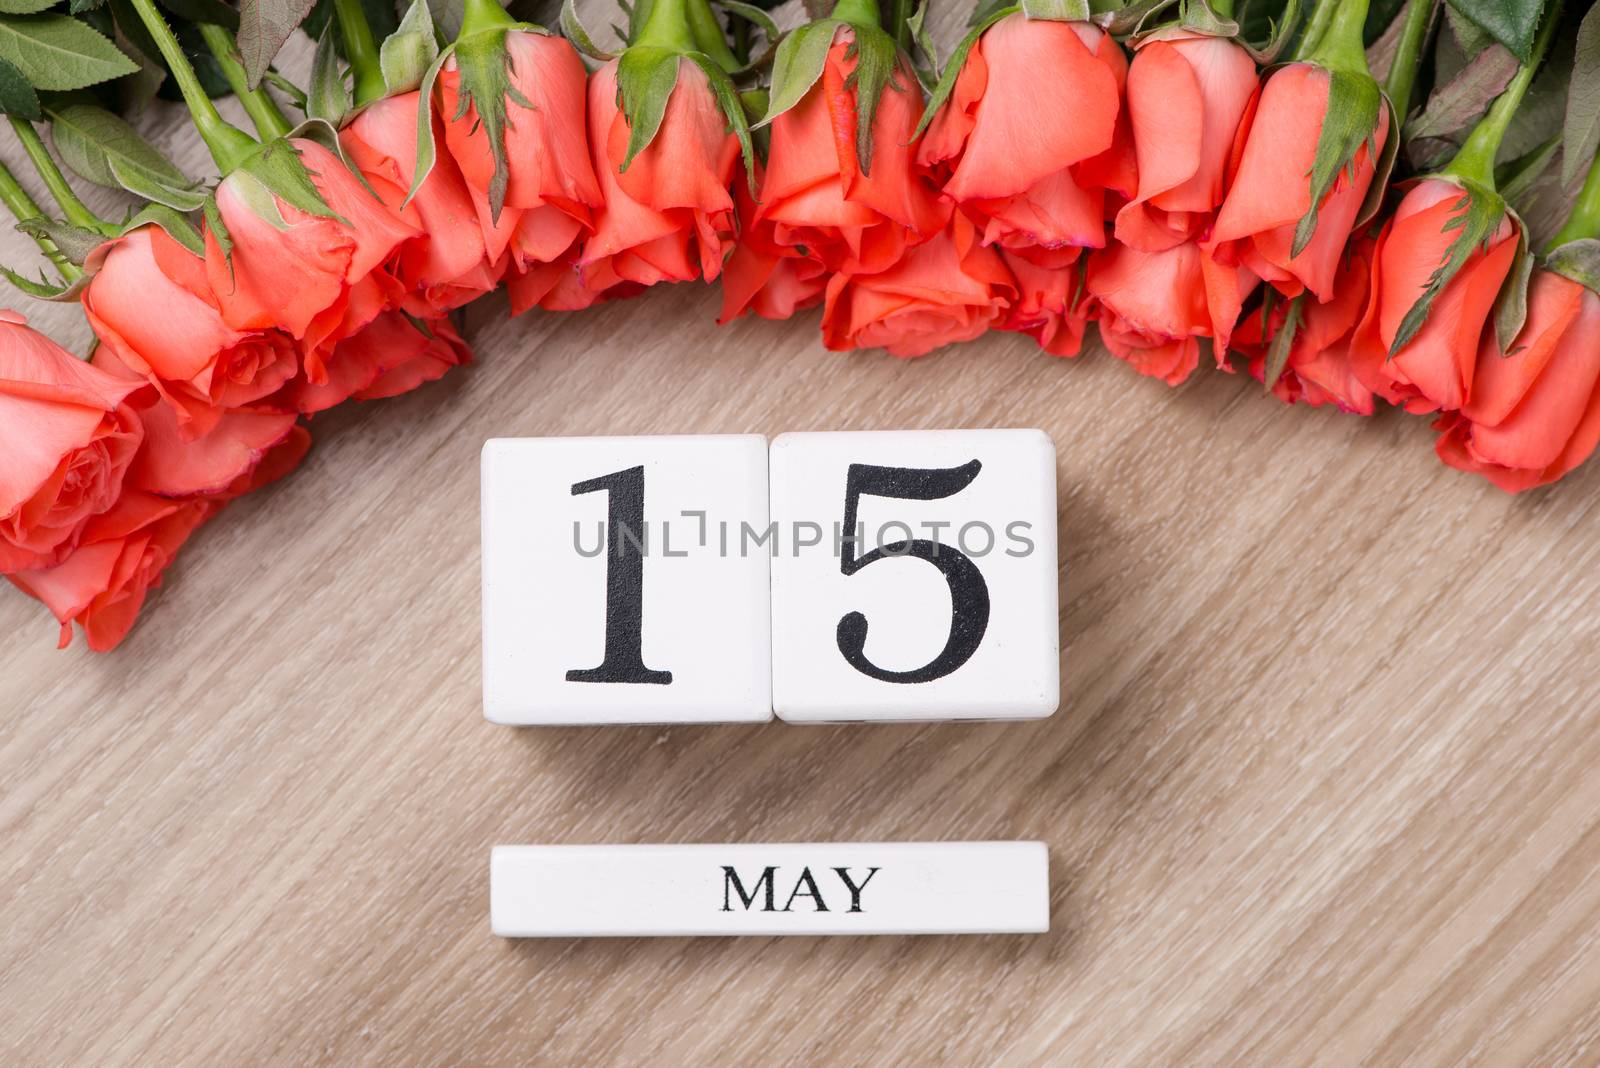 Cube shape calendar for MAY 15 on wooden table with roses